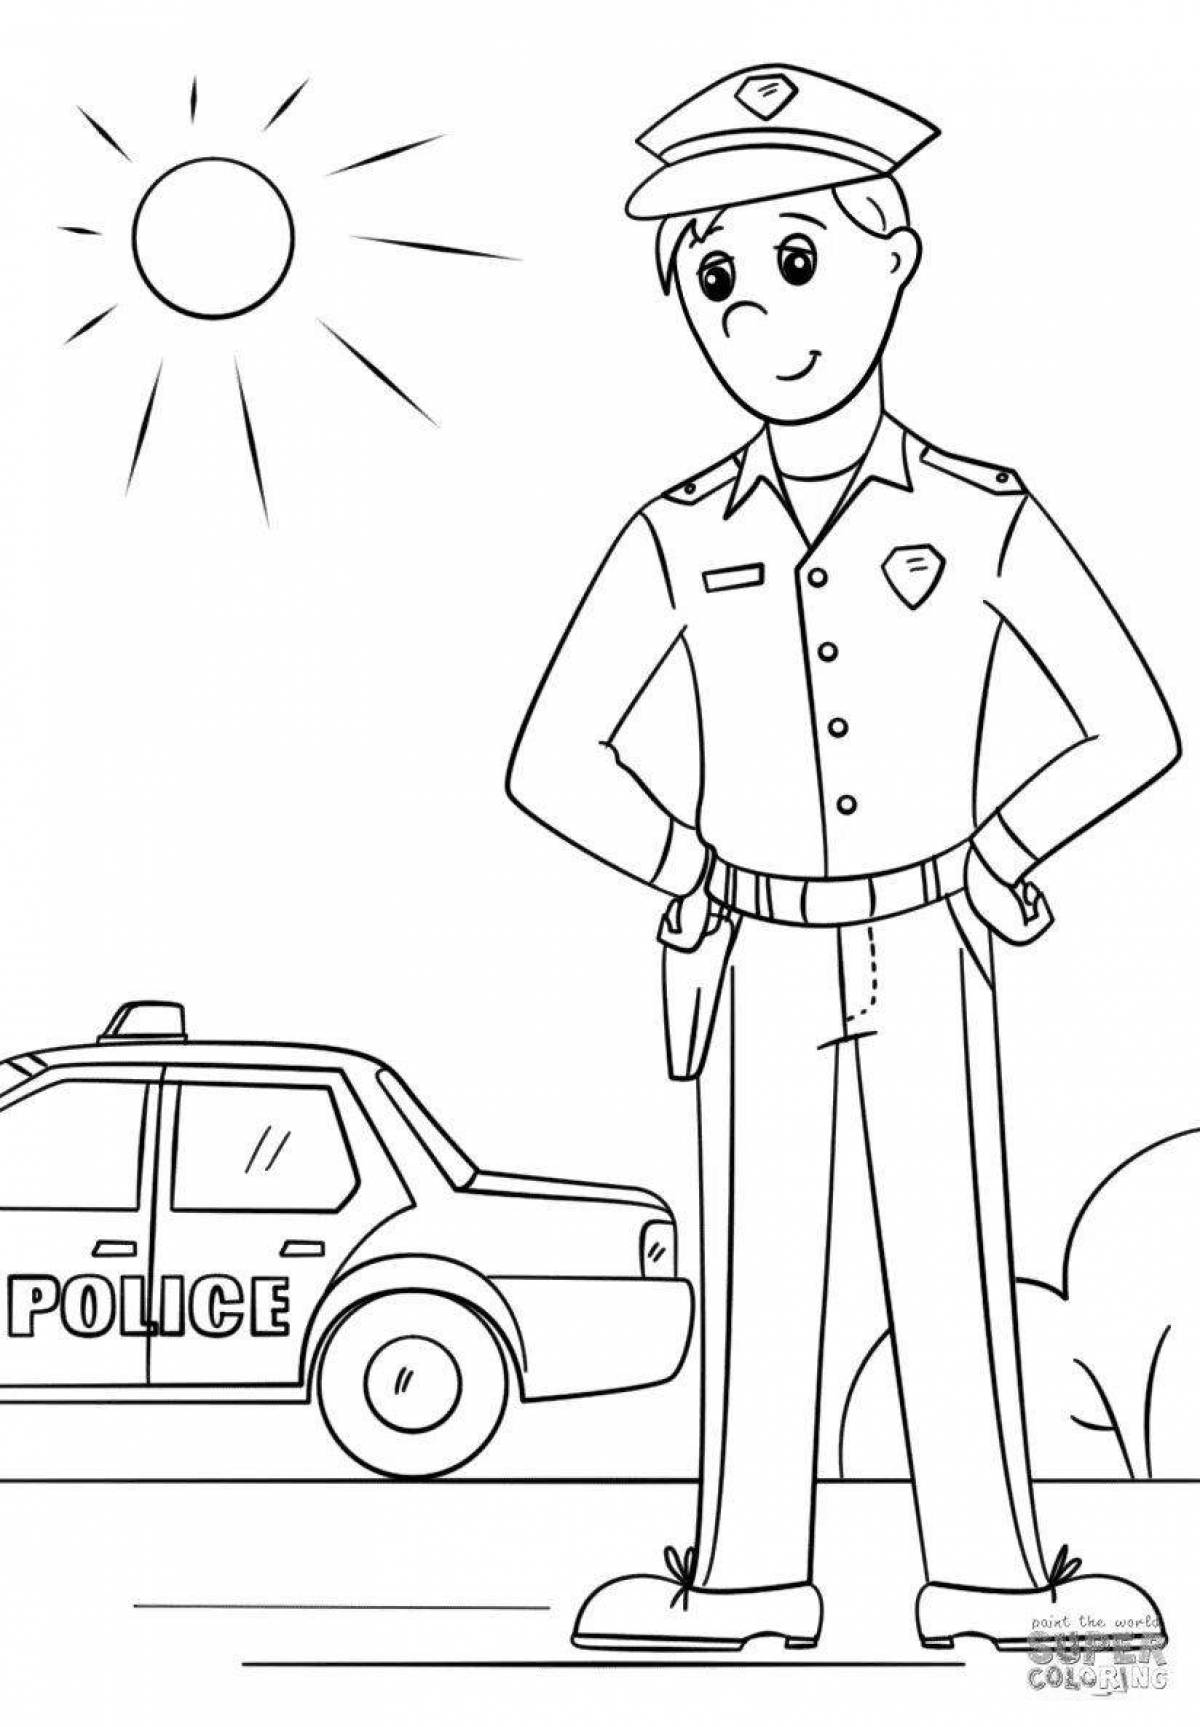 Funny traffic police coloring book